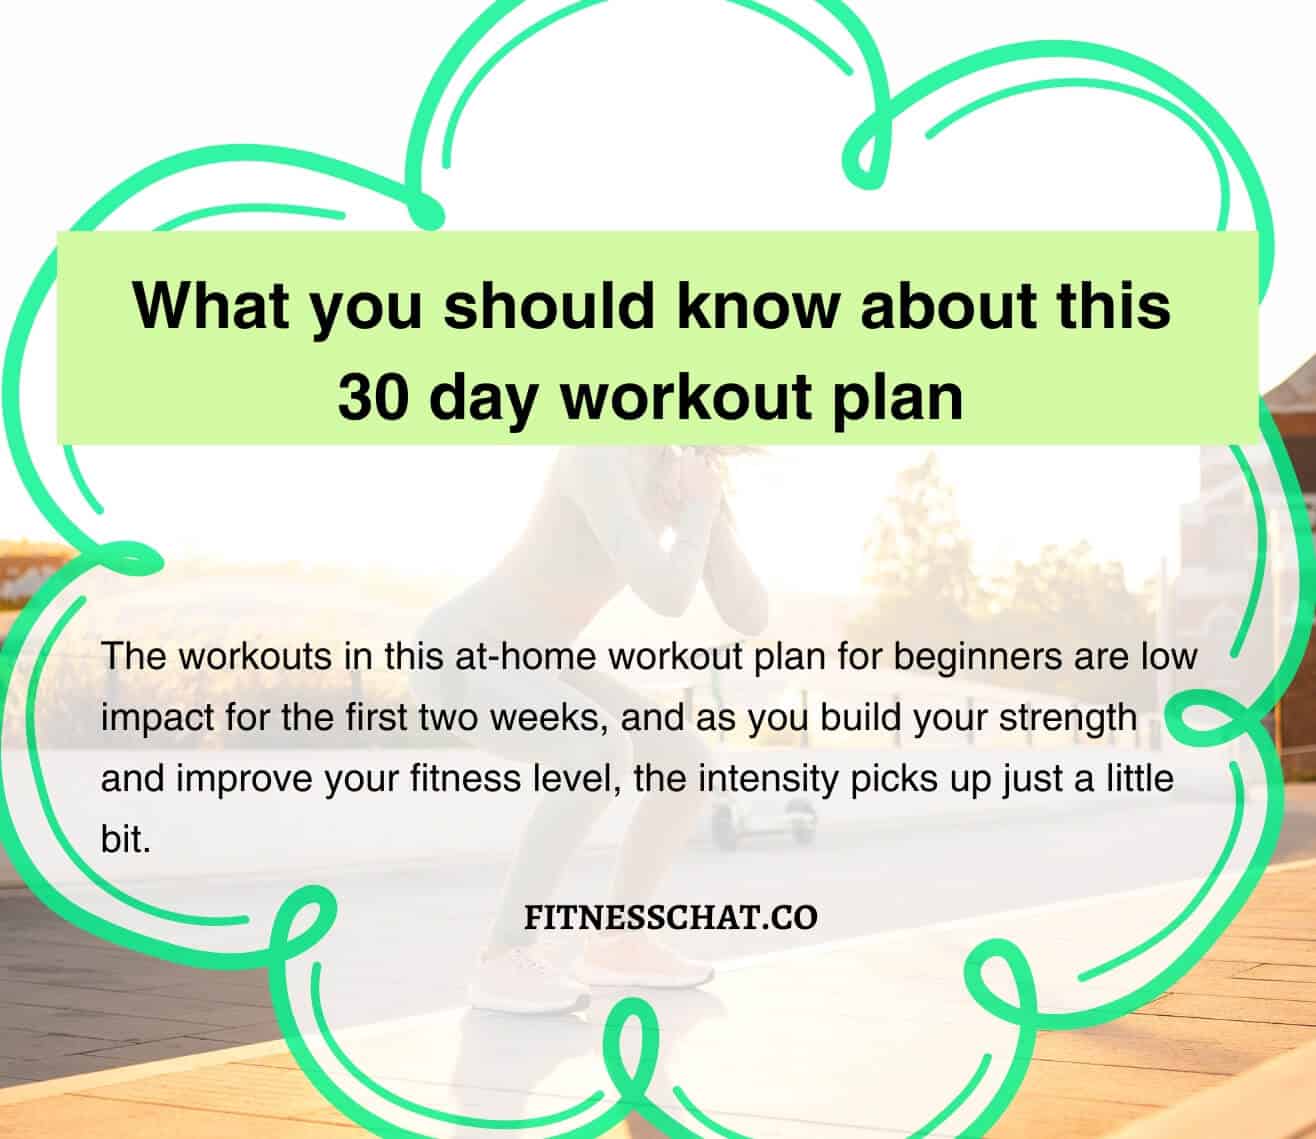 What you should know about this 30 day workout plan